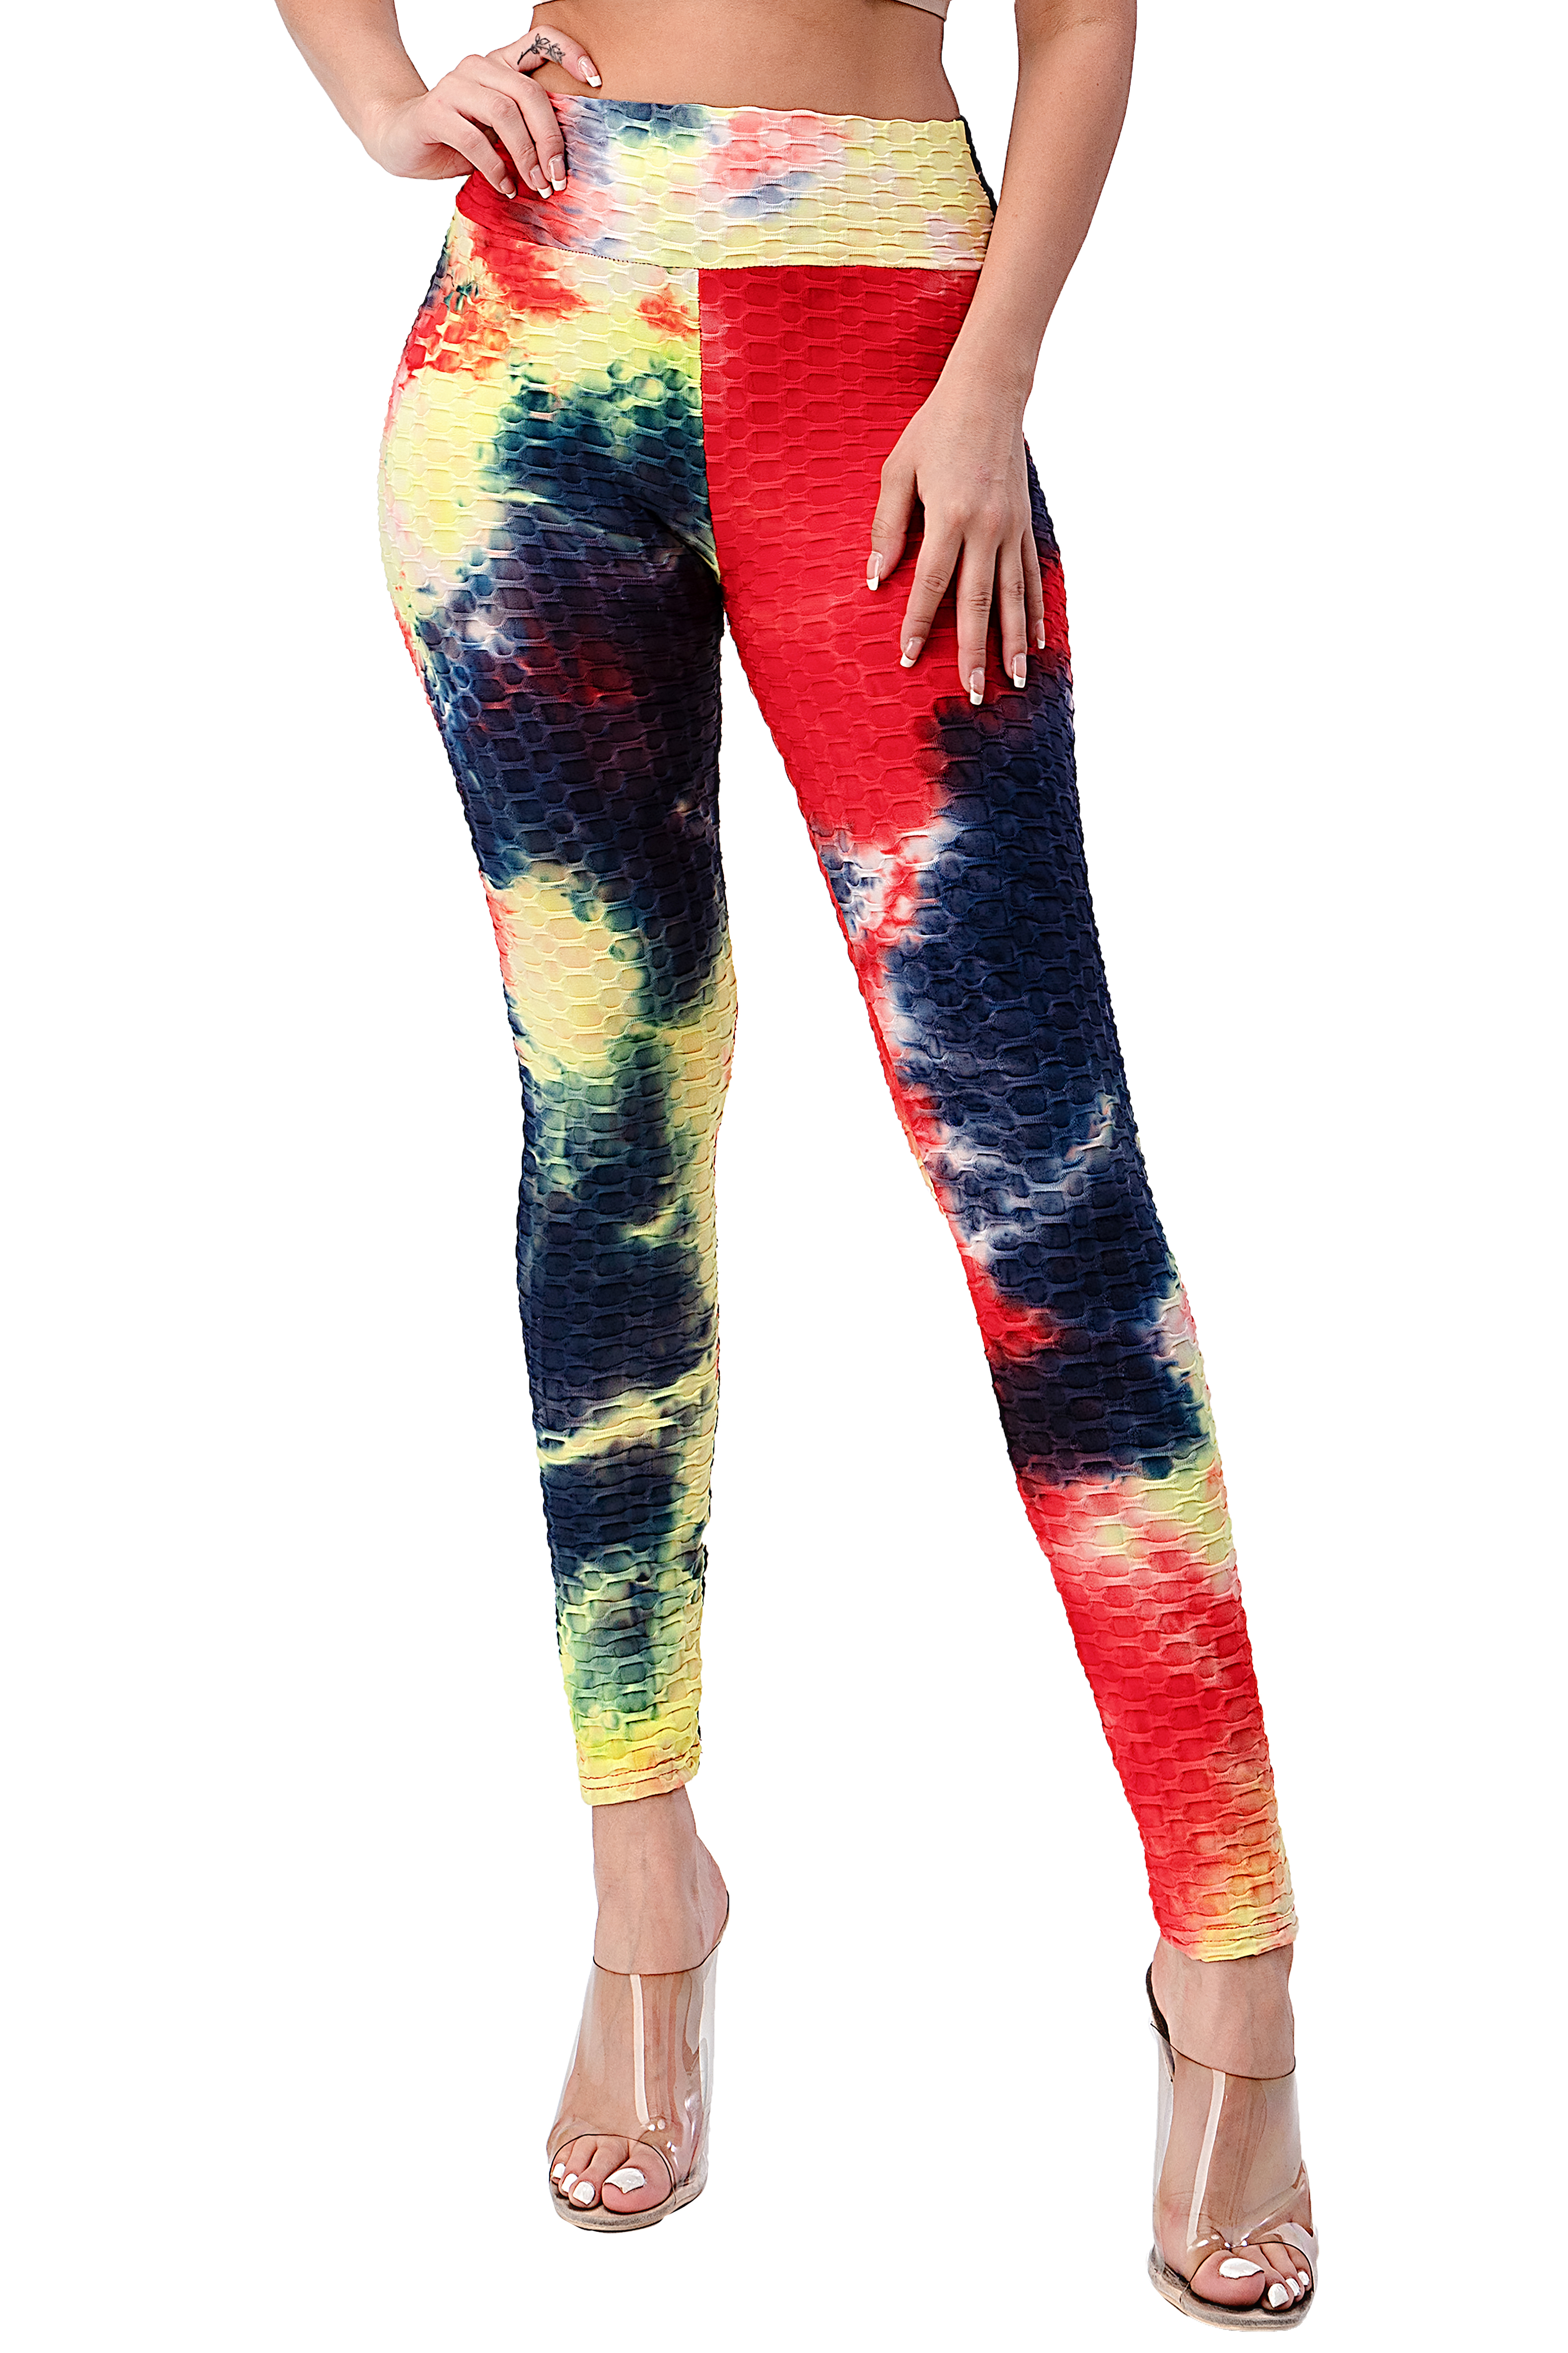 Bubble Scrunch Butt Lifting Push Up Leggings For Women Tie-Dye Ruched  Textured Workout Booty Yoga Pant Red Black S/M 